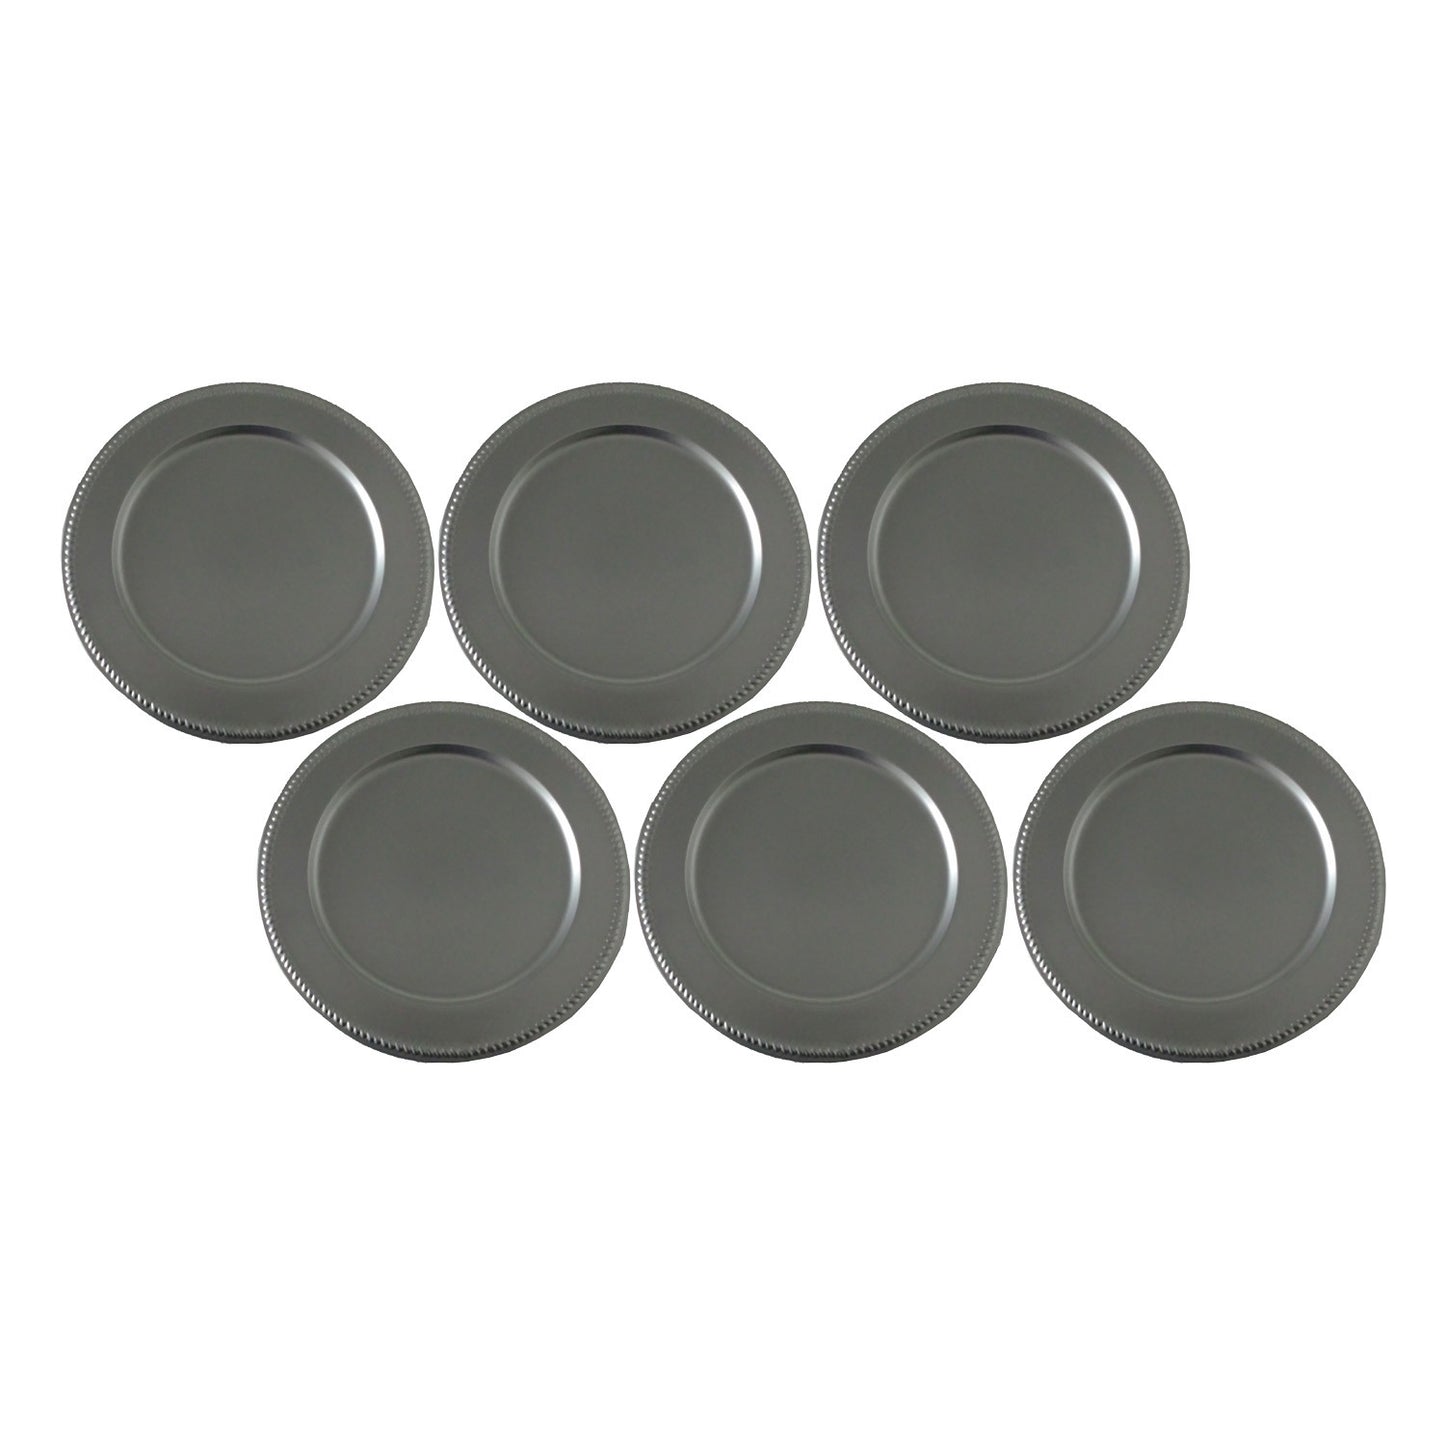 GiftBay Creations CP-007(S/6) Wedding Metal Charger Plates 13" Round, Silver Finish Set of 6 Plates